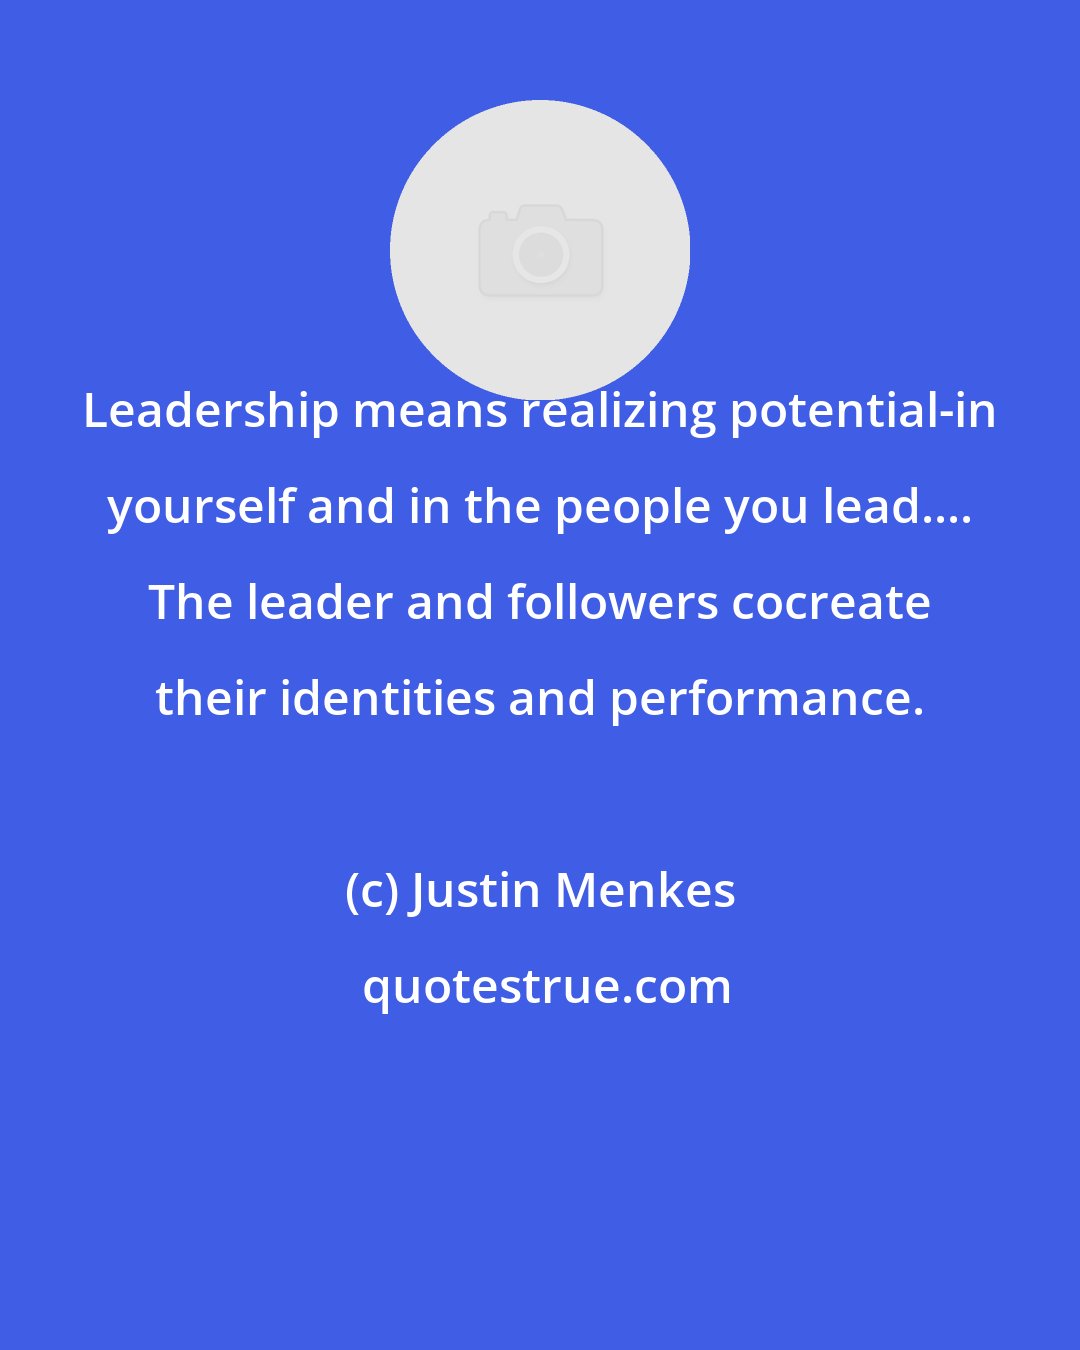 Justin Menkes: Leadership means realizing potential-in yourself and in the people you lead.... The leader and followers cocreate their identities and performance.